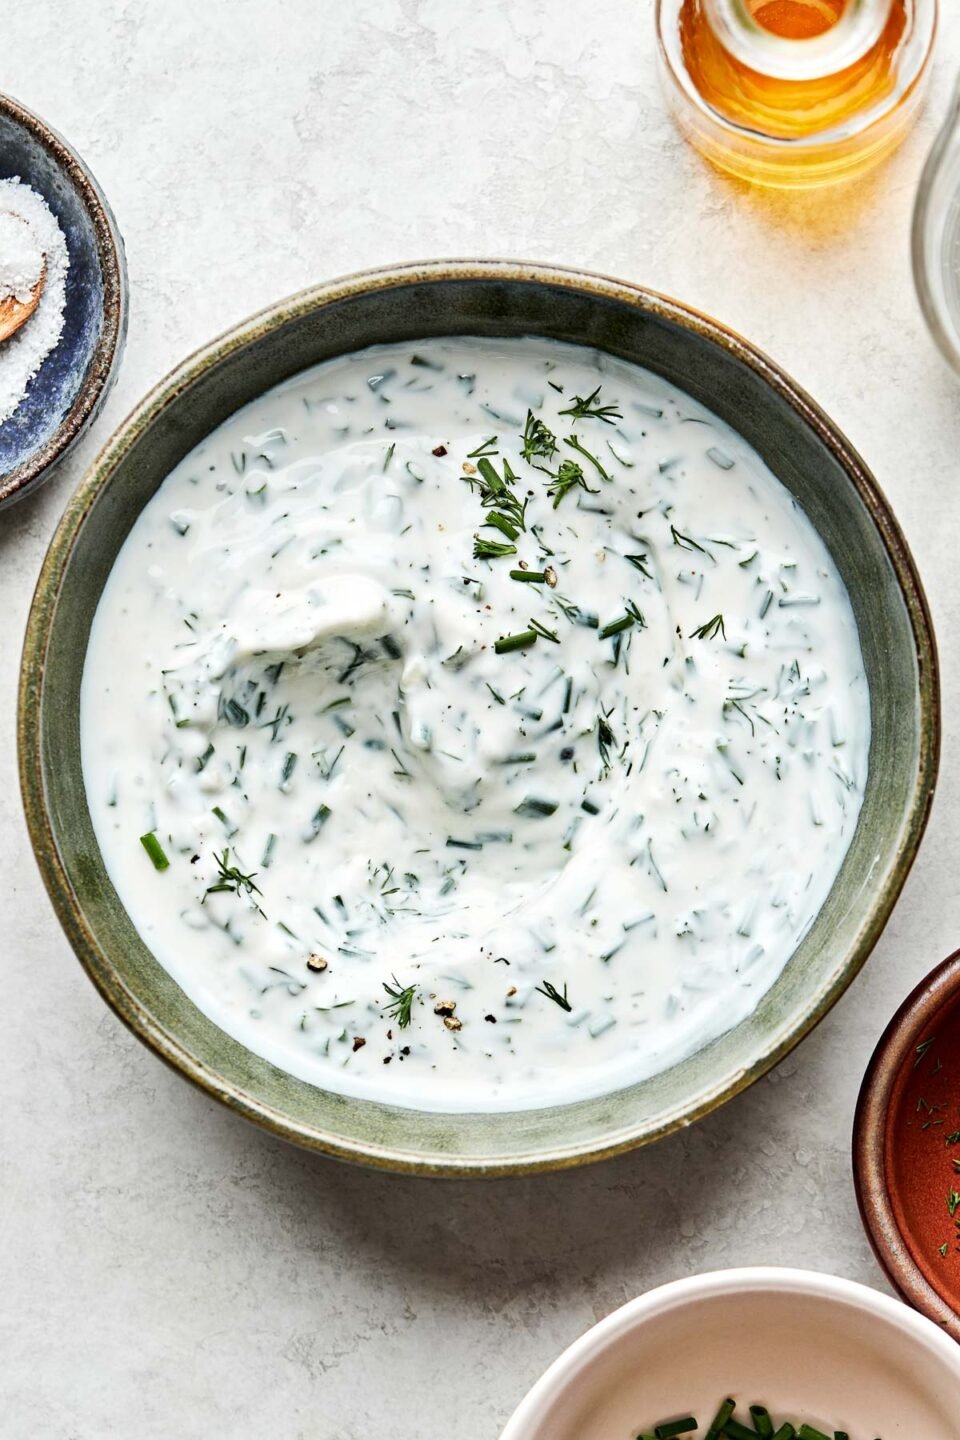 An overhead shot of ranch dip in a green stoneware bowl stop a white marbled surface. Dishes of vinegar, chives, dill, and salt sit alongside the bowl.